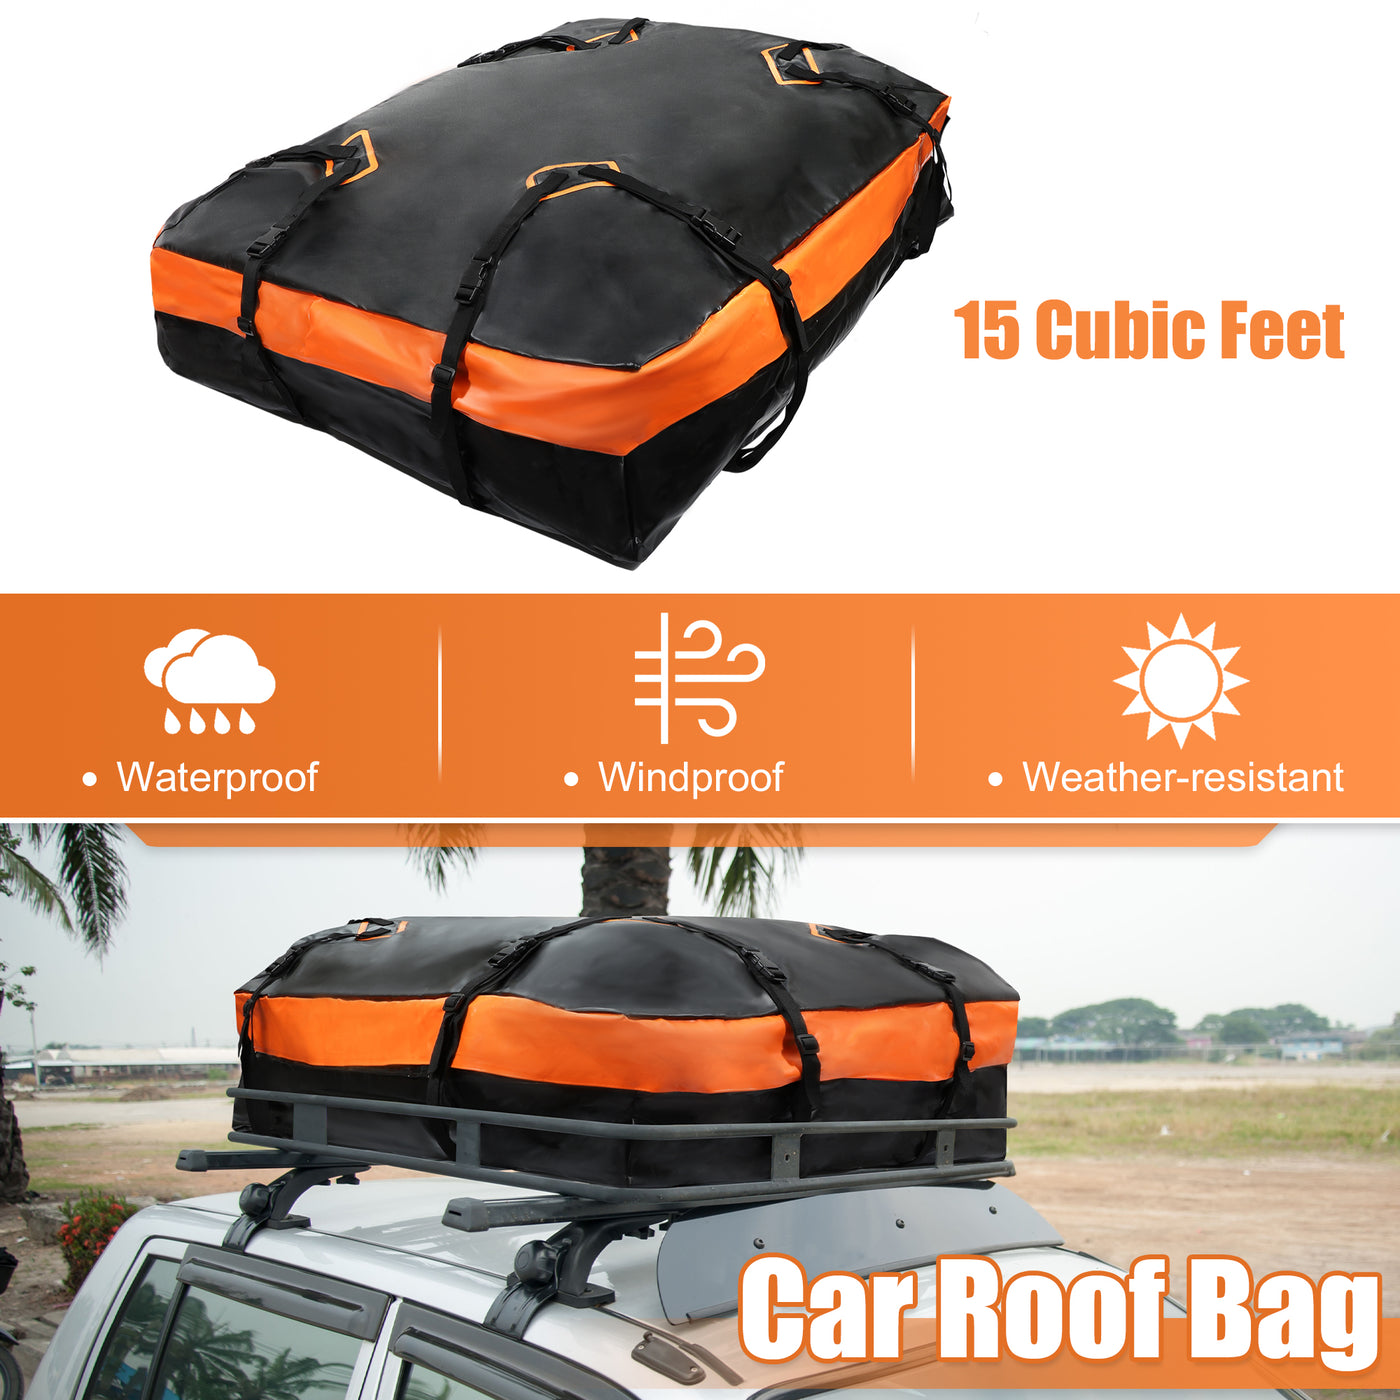 X AUTOHAUX 15 Cubic Feet Car Roof Bag Rooftop Cargo Carrier Bag Waterproof Luggage Carriers for Cars with or without Rack Anti-Slip Mat 4 Door Hooks Set